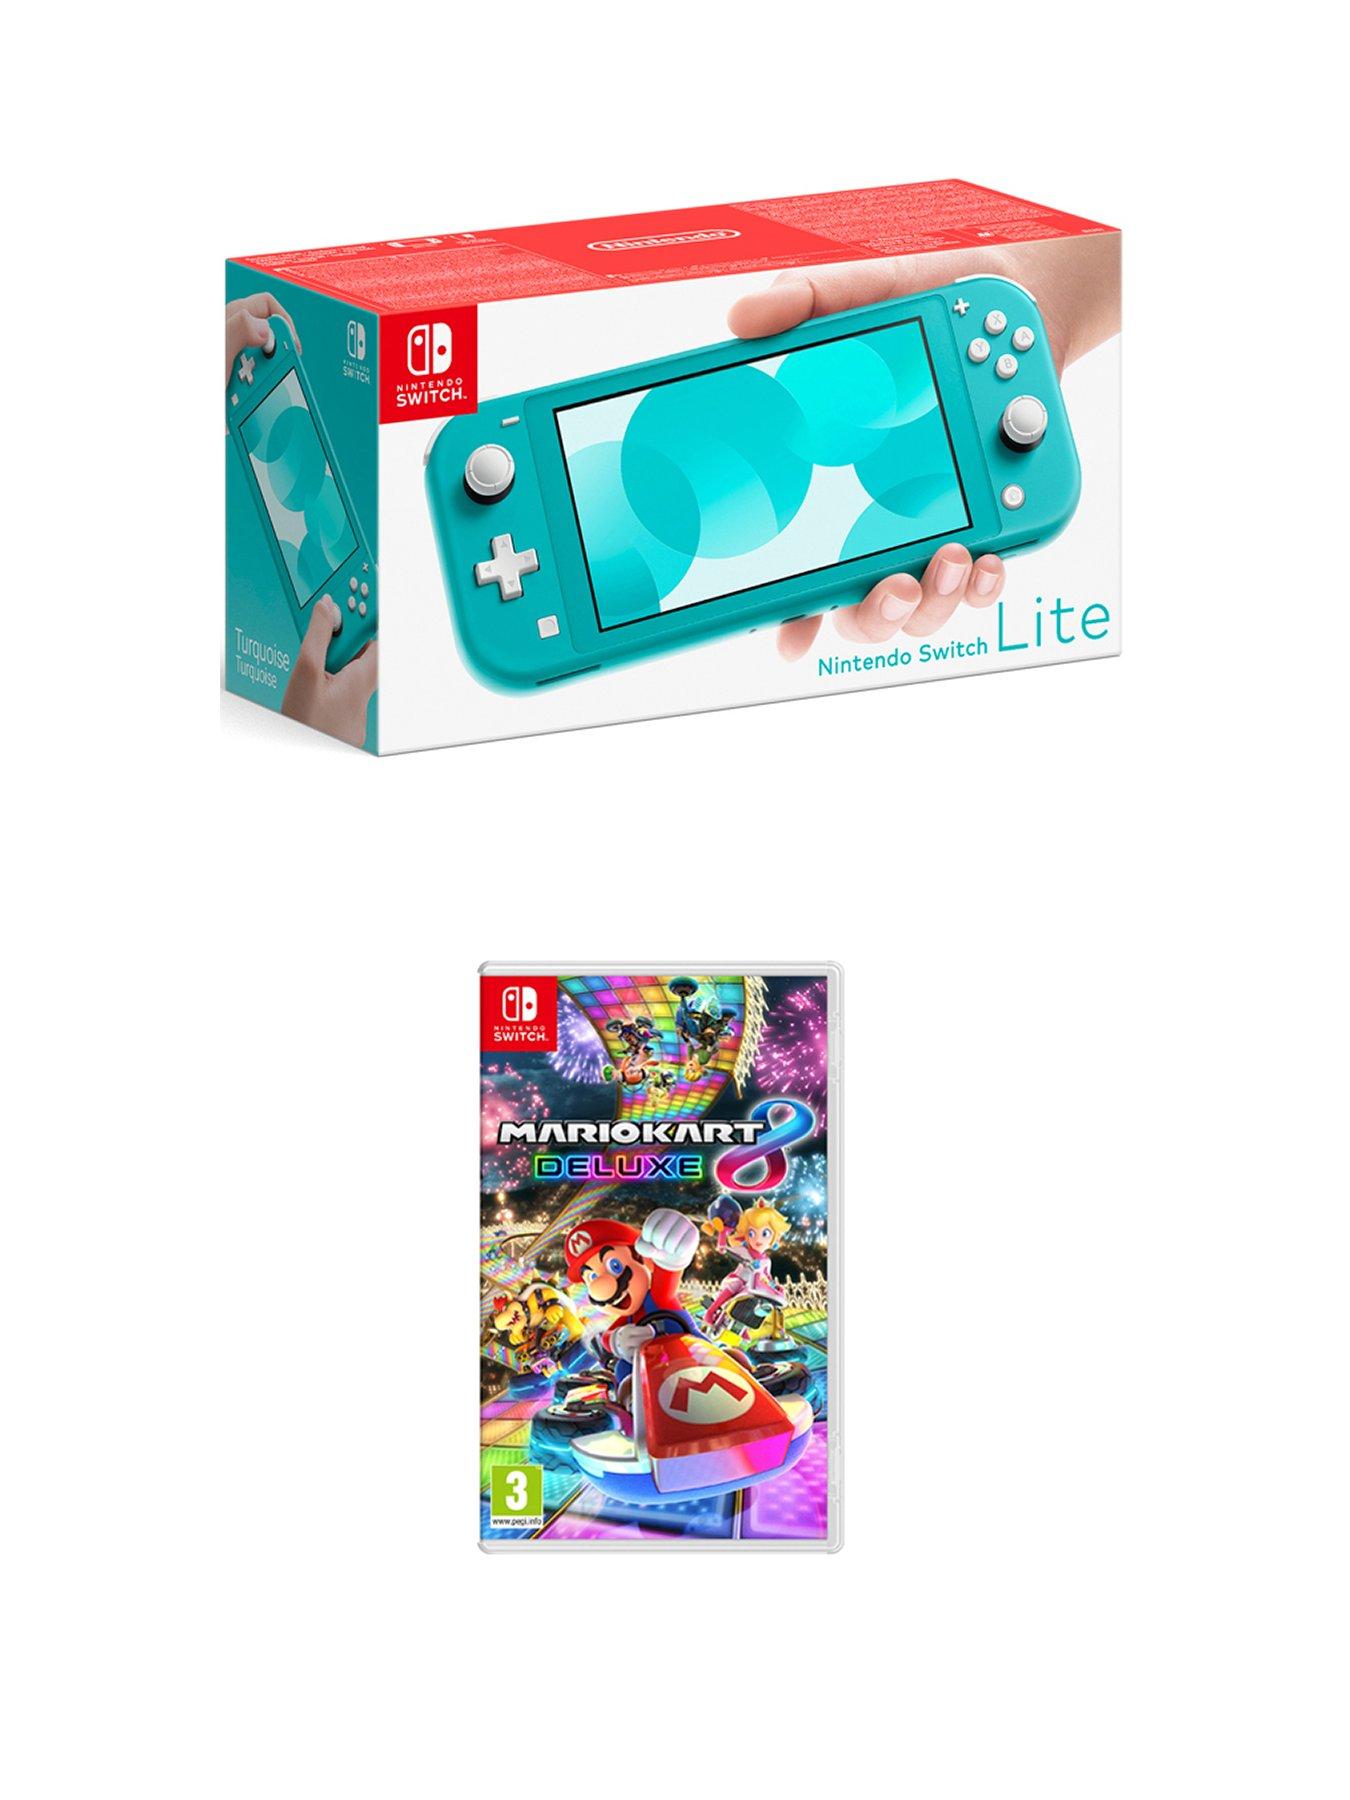 can you play mario kart on switch lite